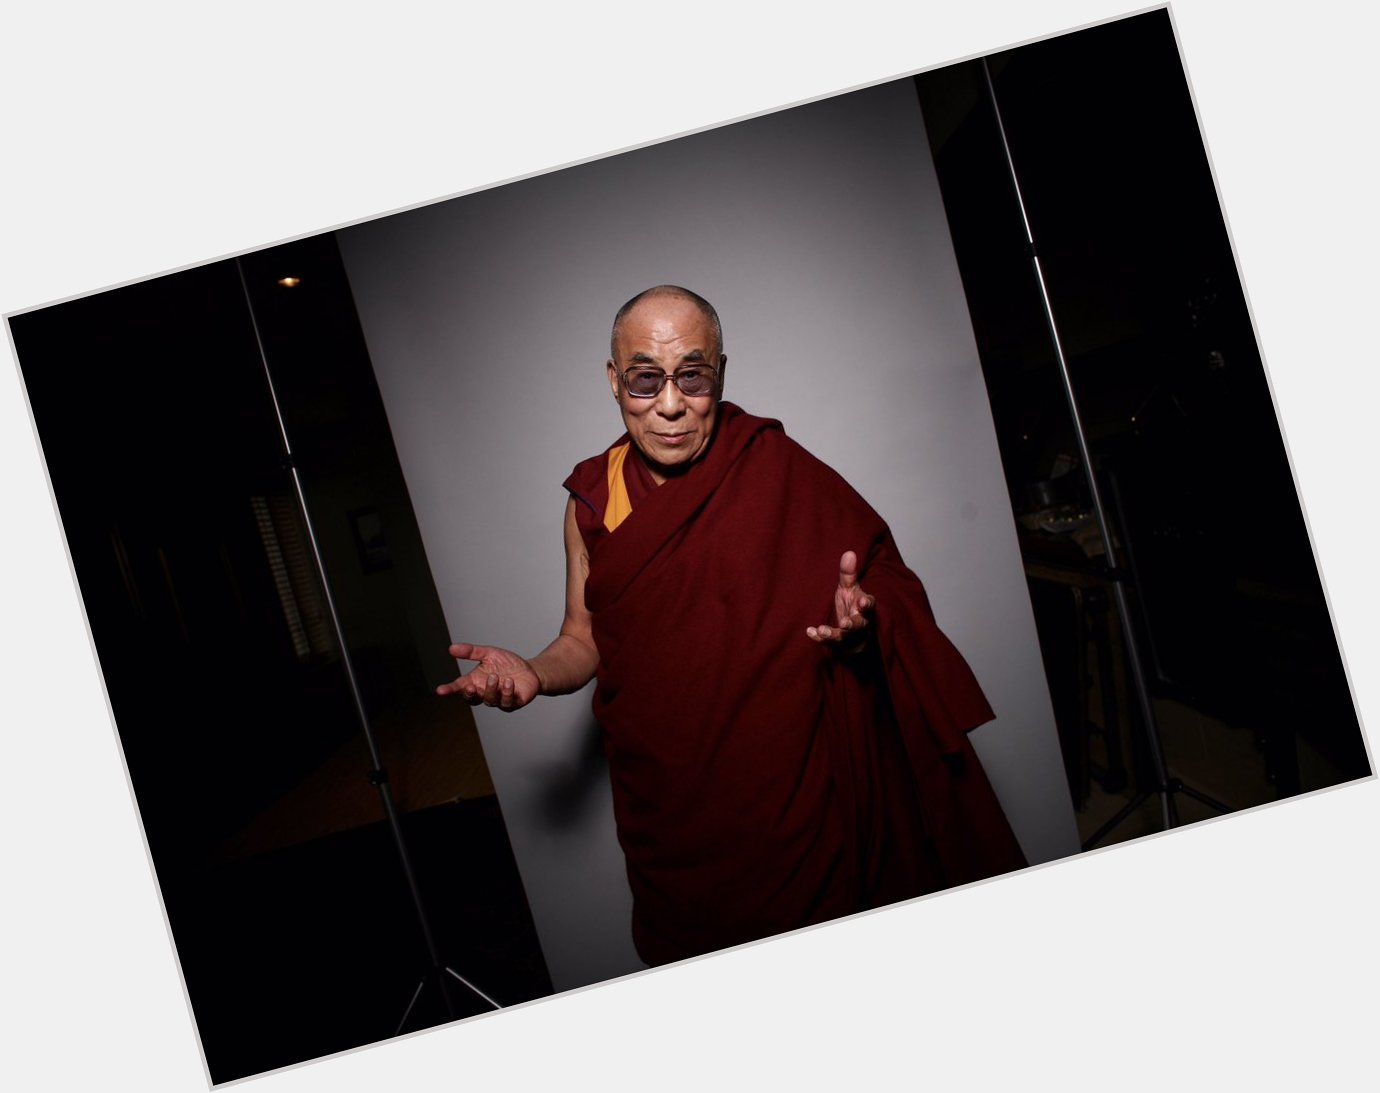 I have had the honour of photographing His Holiness a few times.  Happy 85th Birthday to the Dalai Lama! 